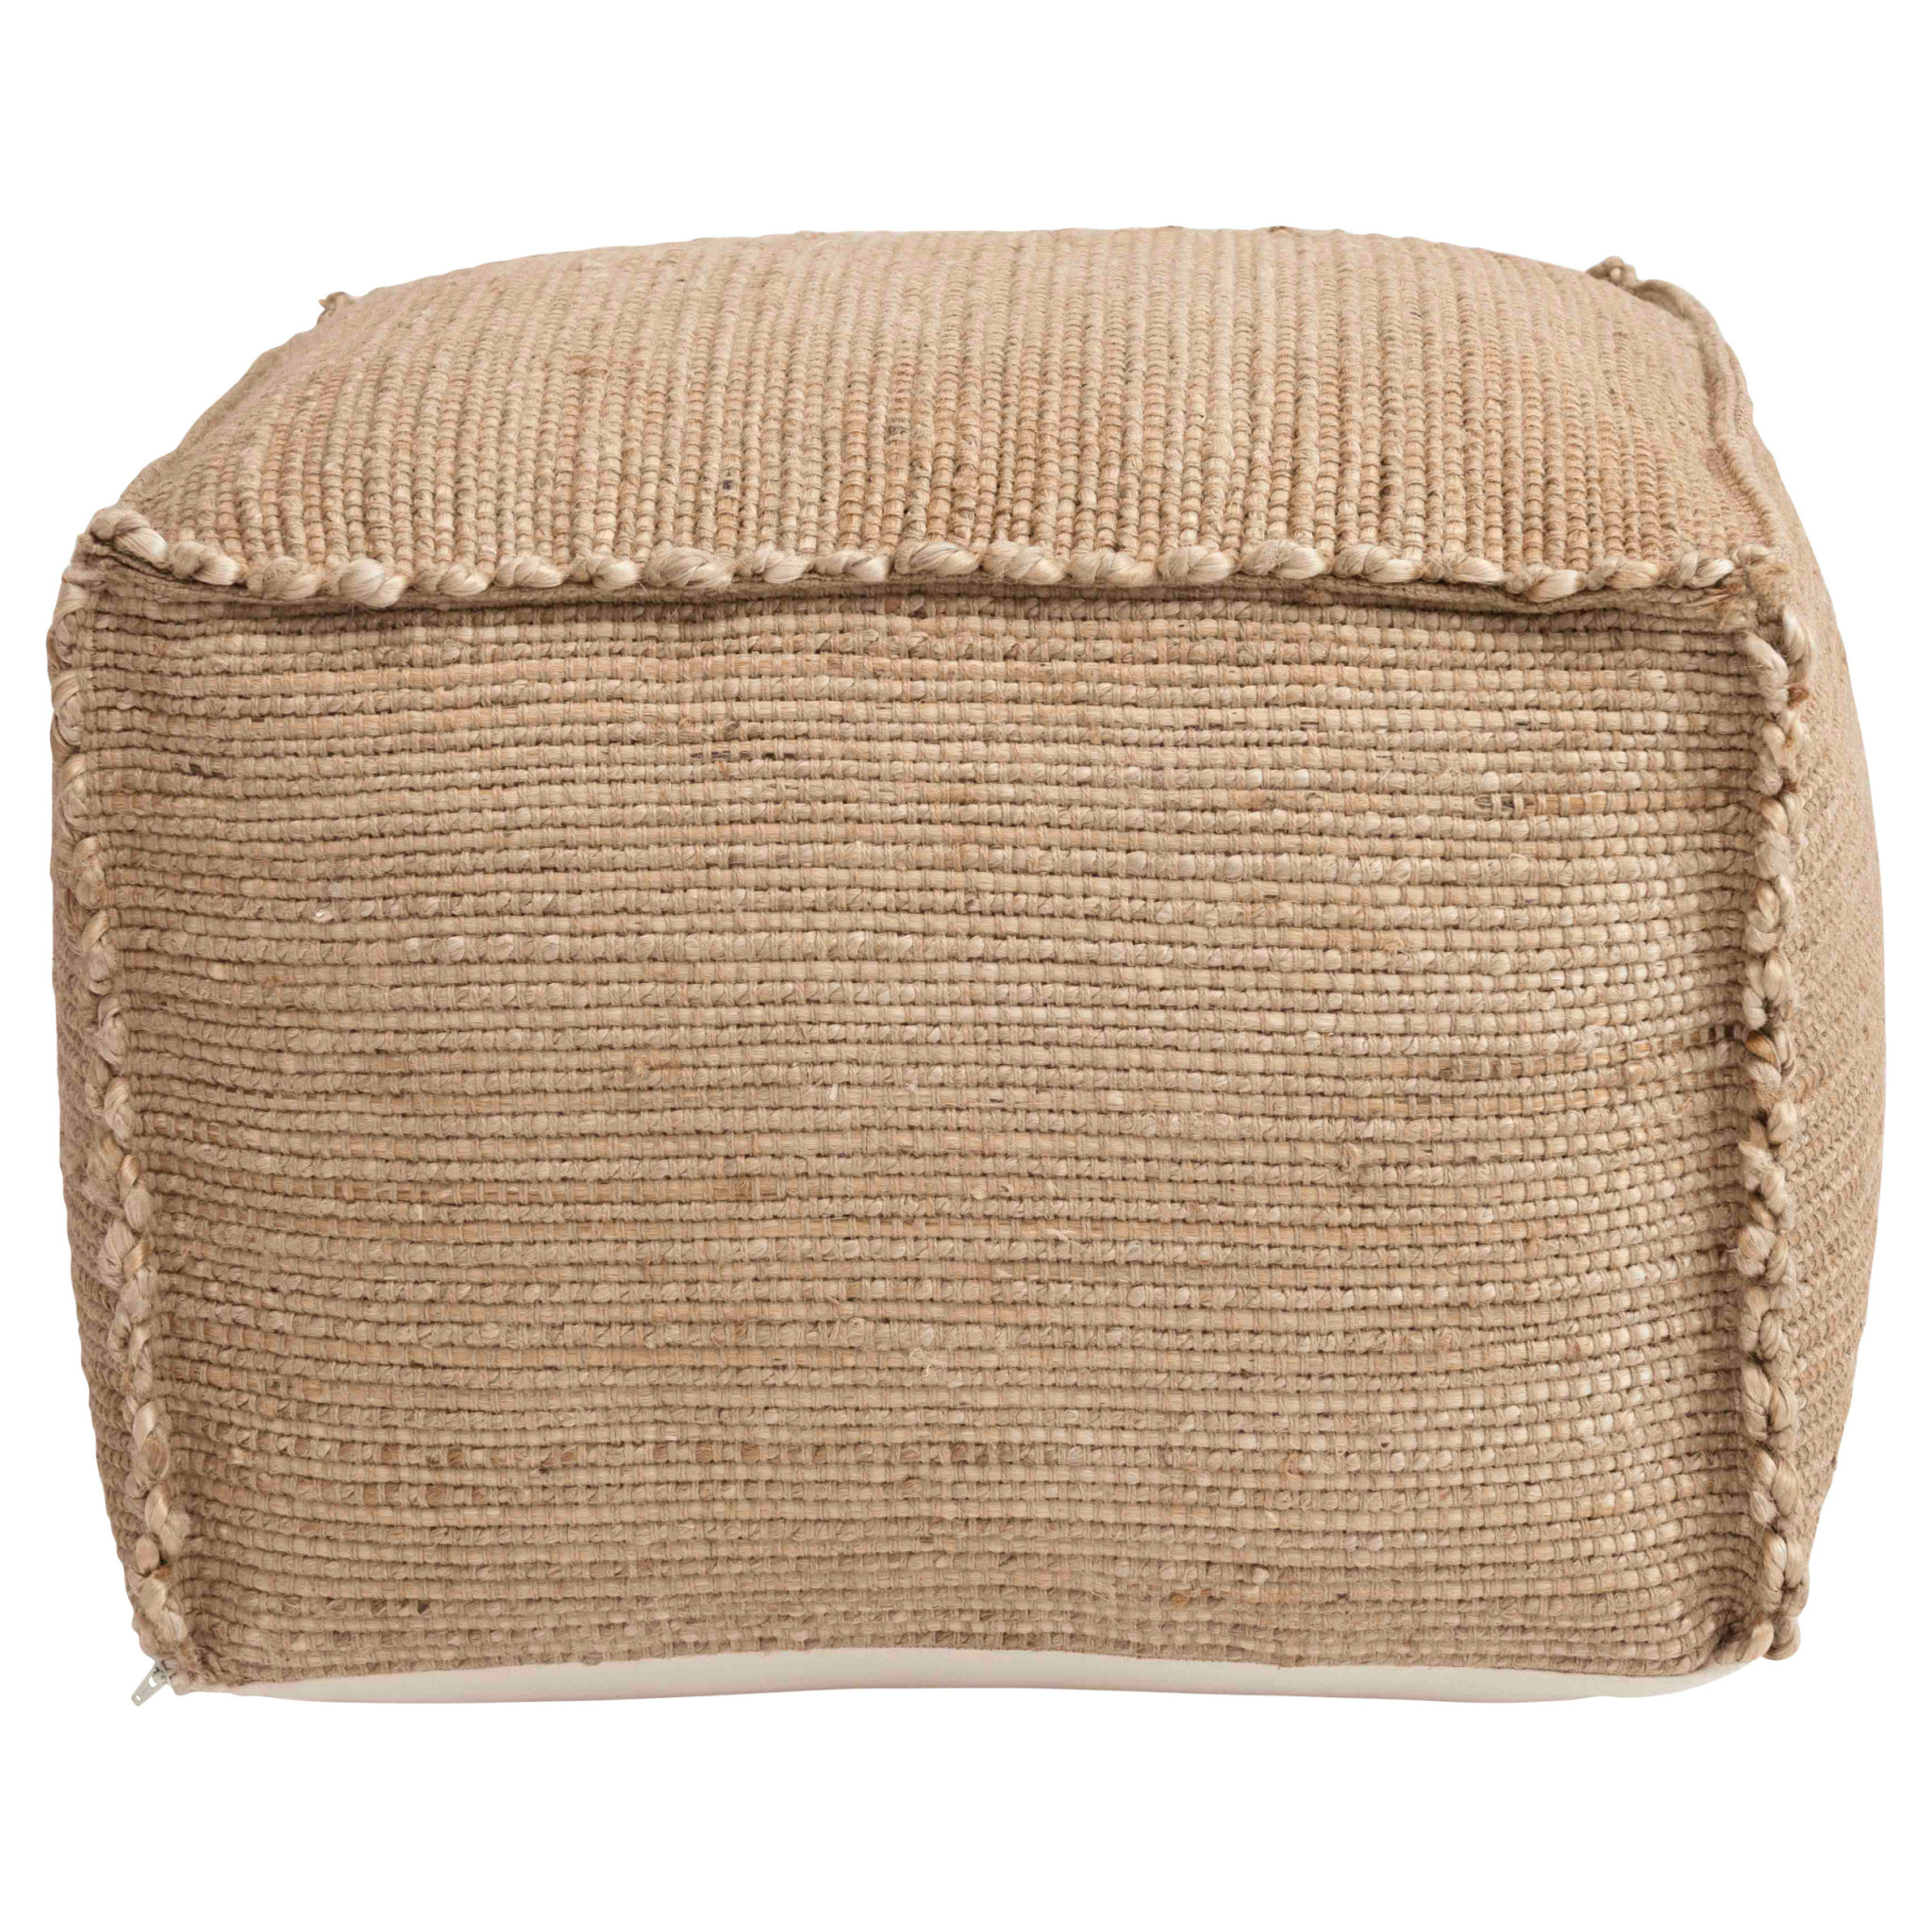 Hand-Woven Jute Pouf, Natural, Available for local pick up